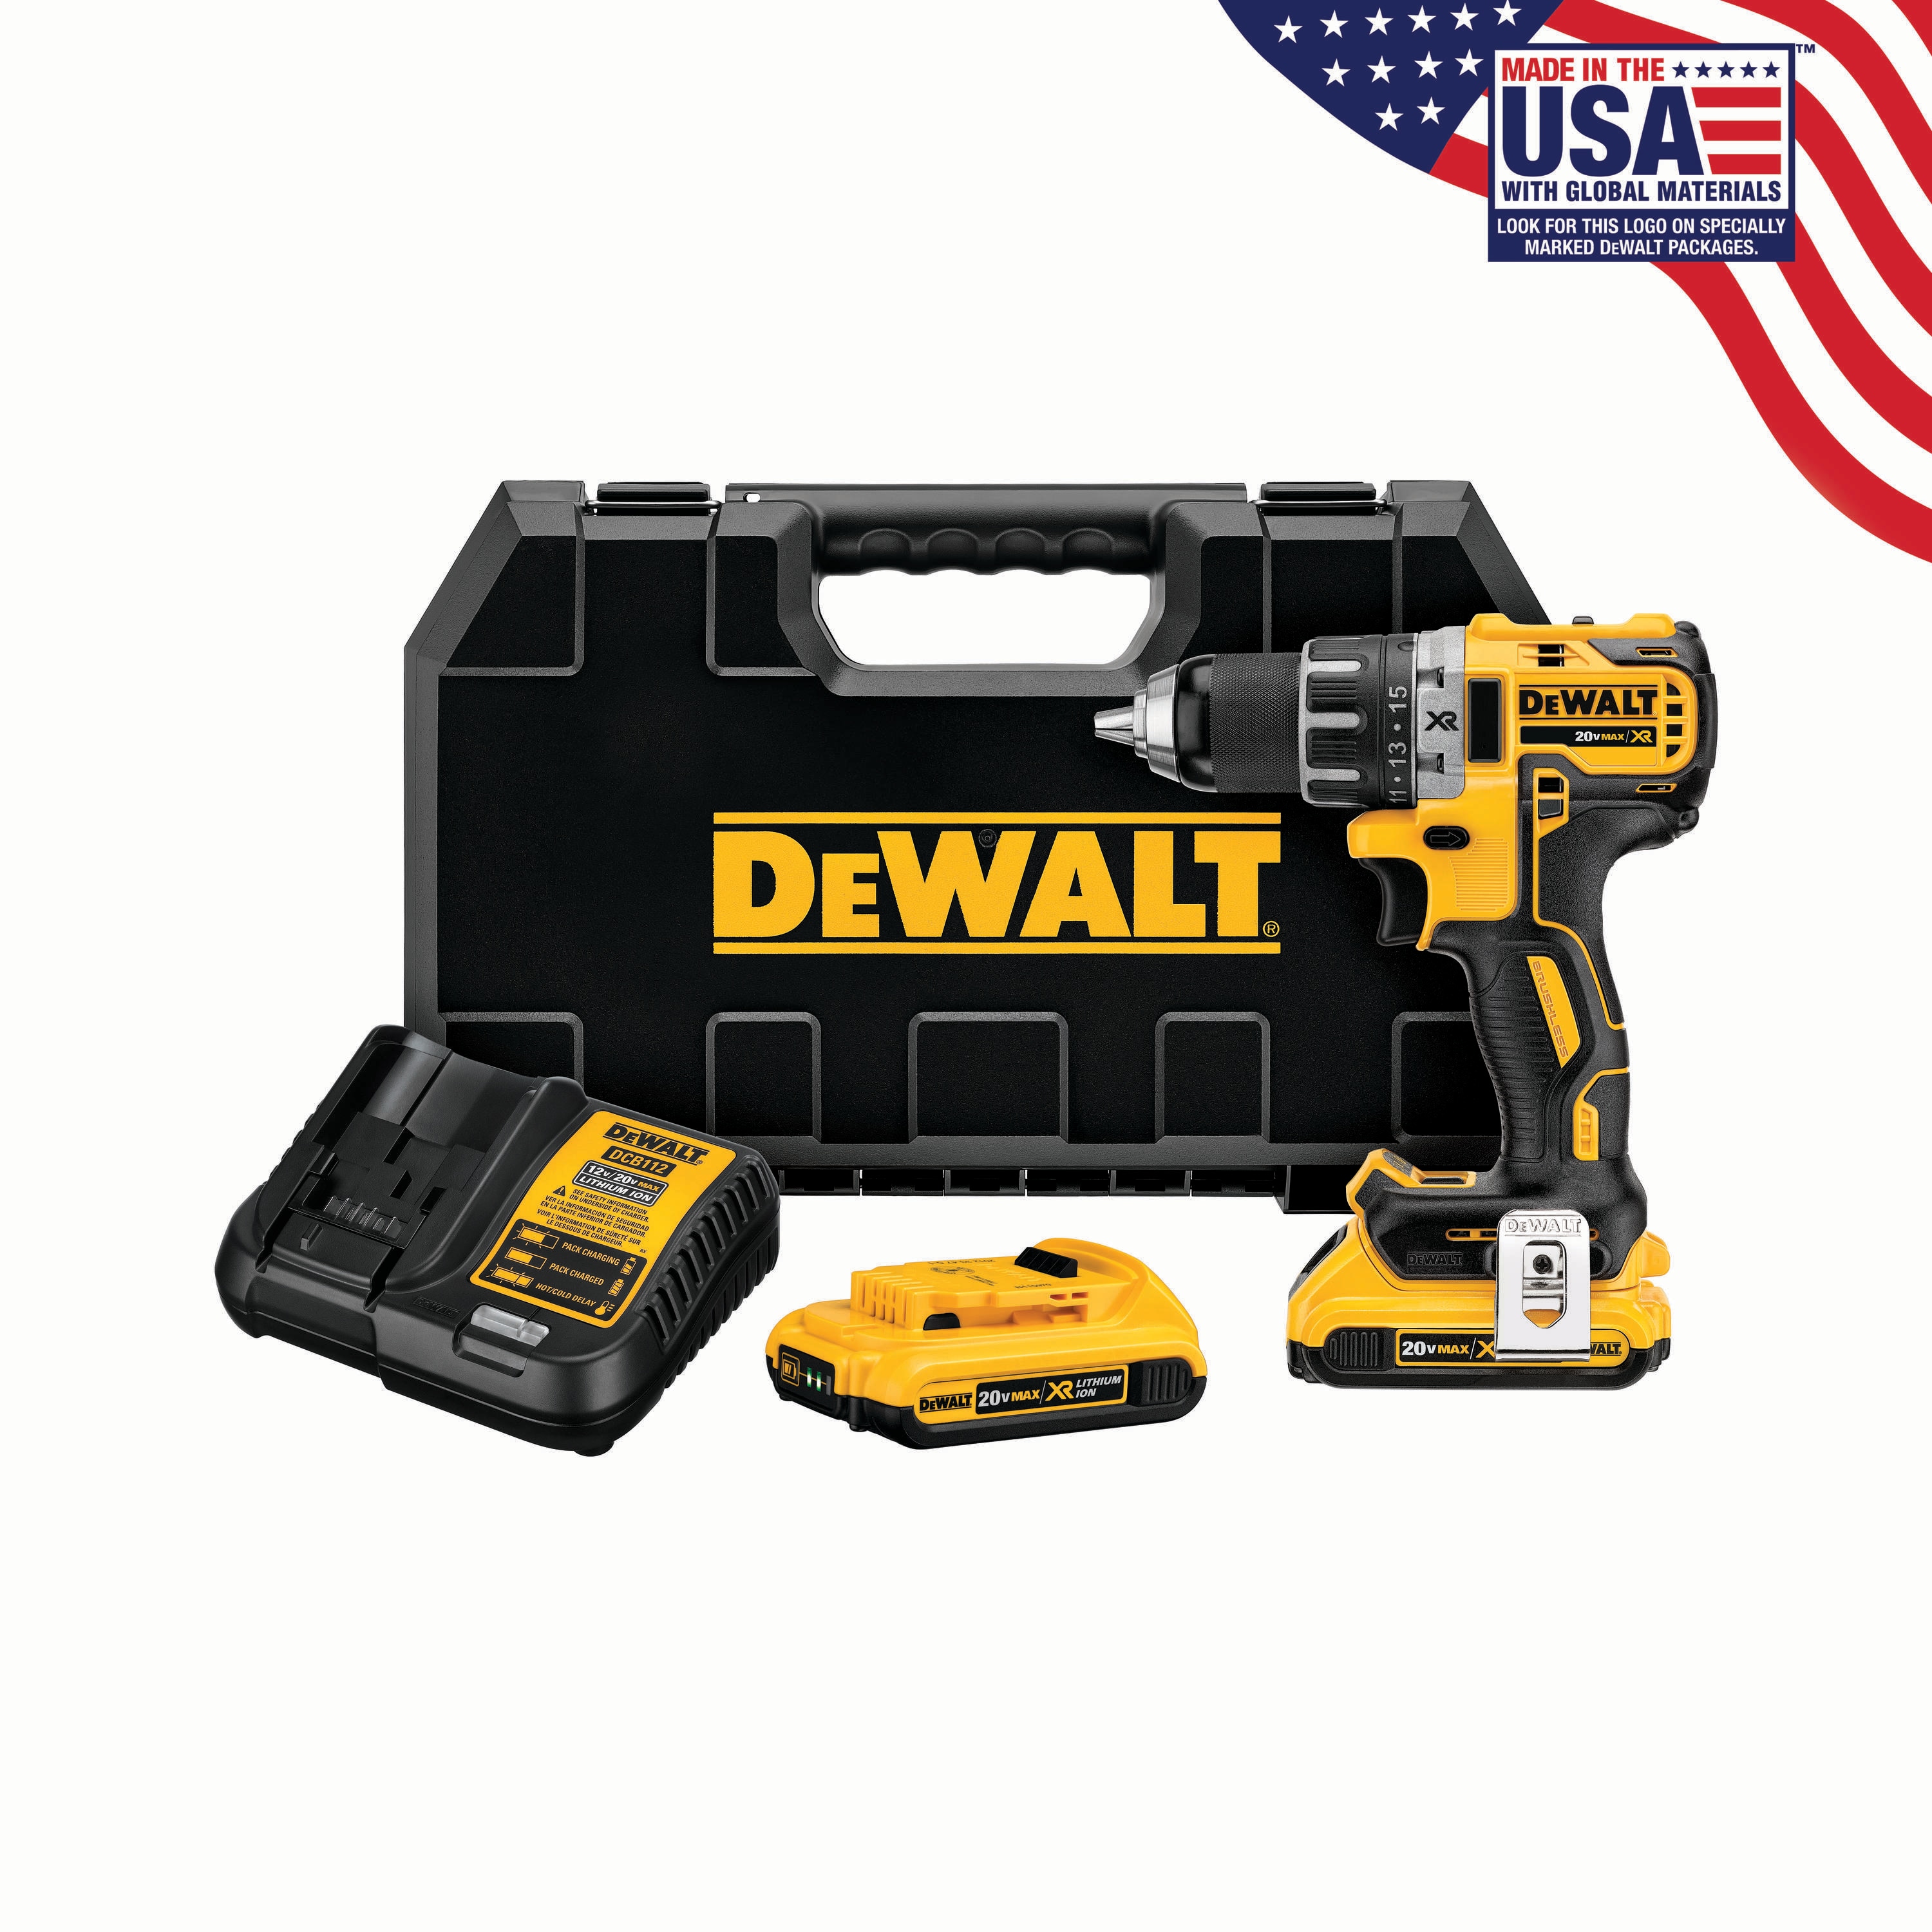 DEWALT XR 20-volt 1/2-in Brushless Cordless Drill (2-Batteries Included and Charger Included)